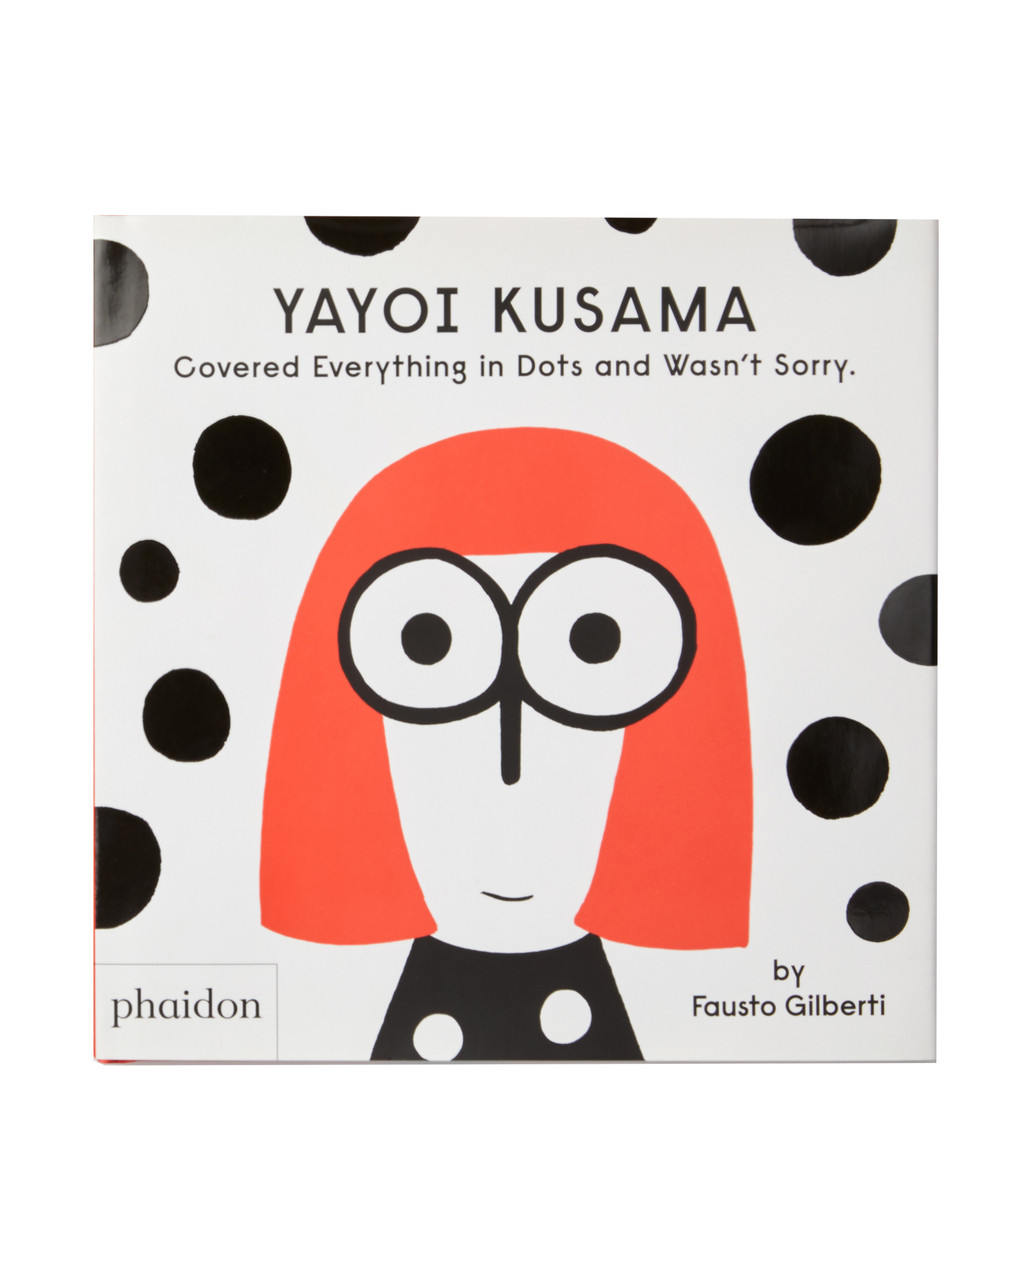 The Smithsonian Just Discovered Four Unknown Yayoi Kusama